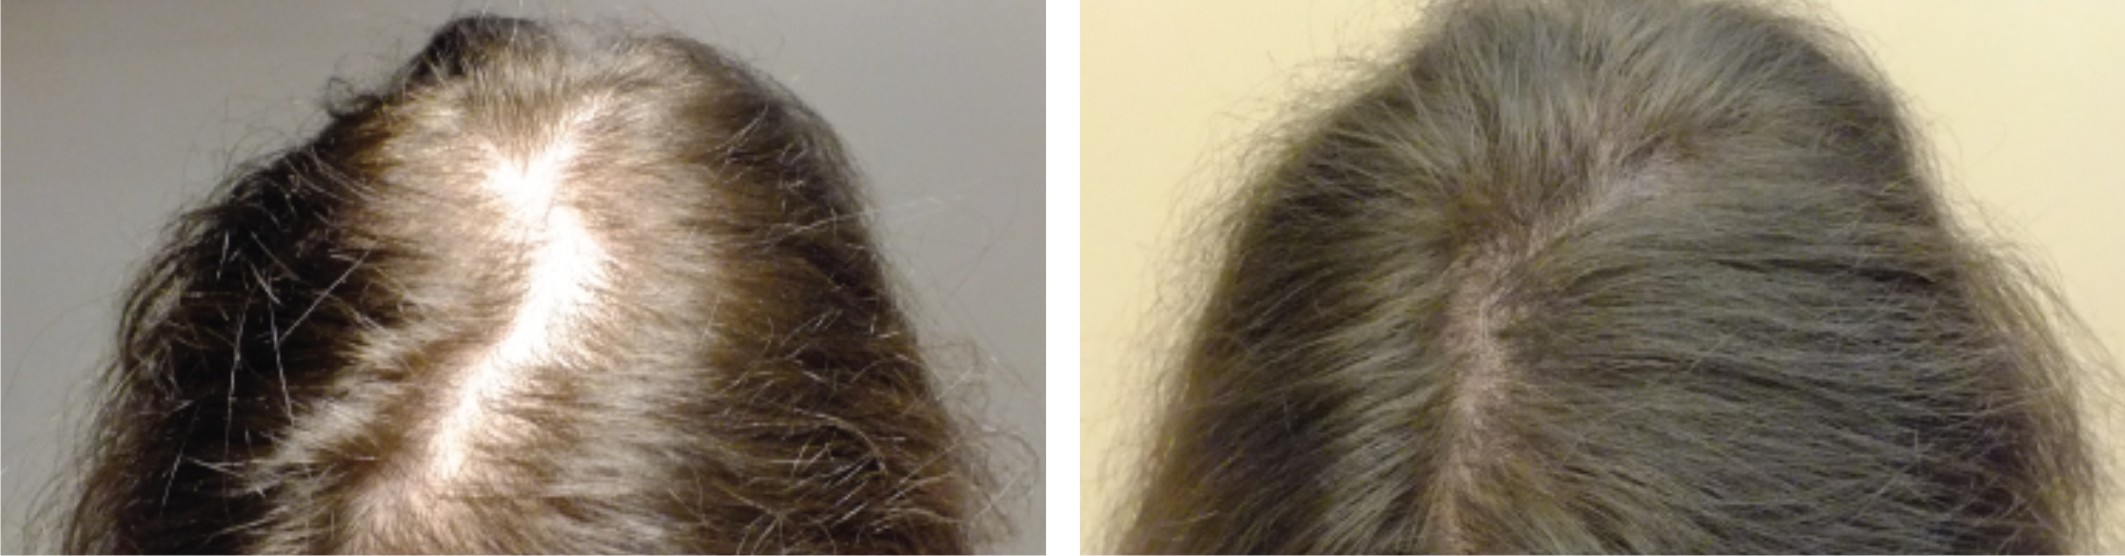 Hair Fall Image Two